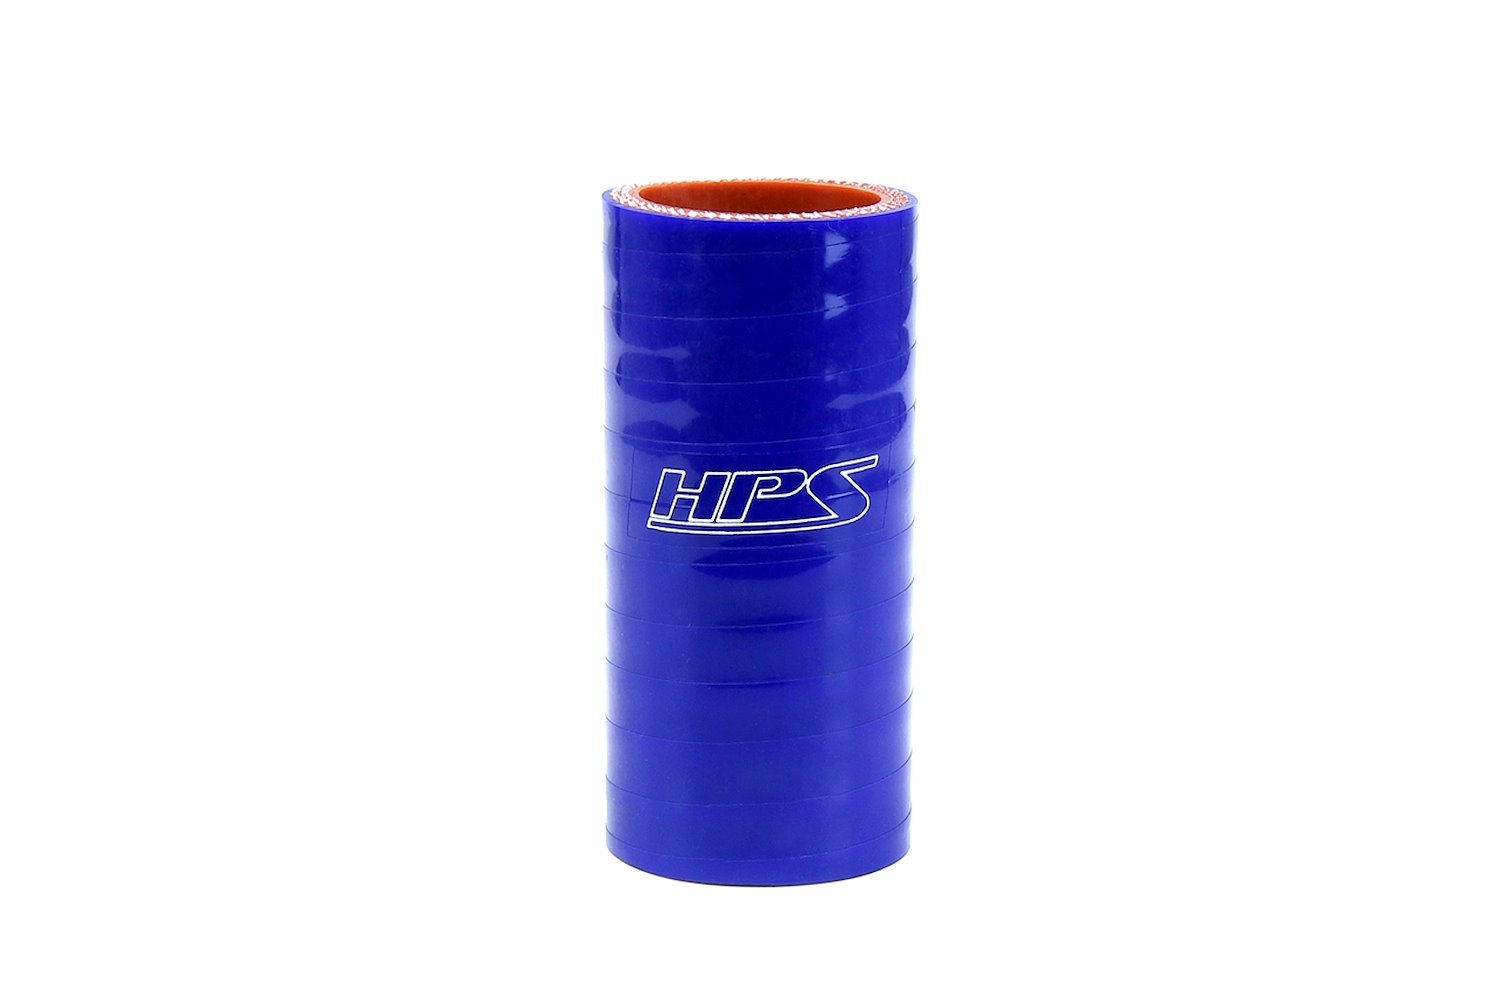 HTSC-150-BLUE Silicone Coupler Hose, High-Temp 4-Ply Reinforced, 1-1/2 in. ID, 3 in. Long, Blue